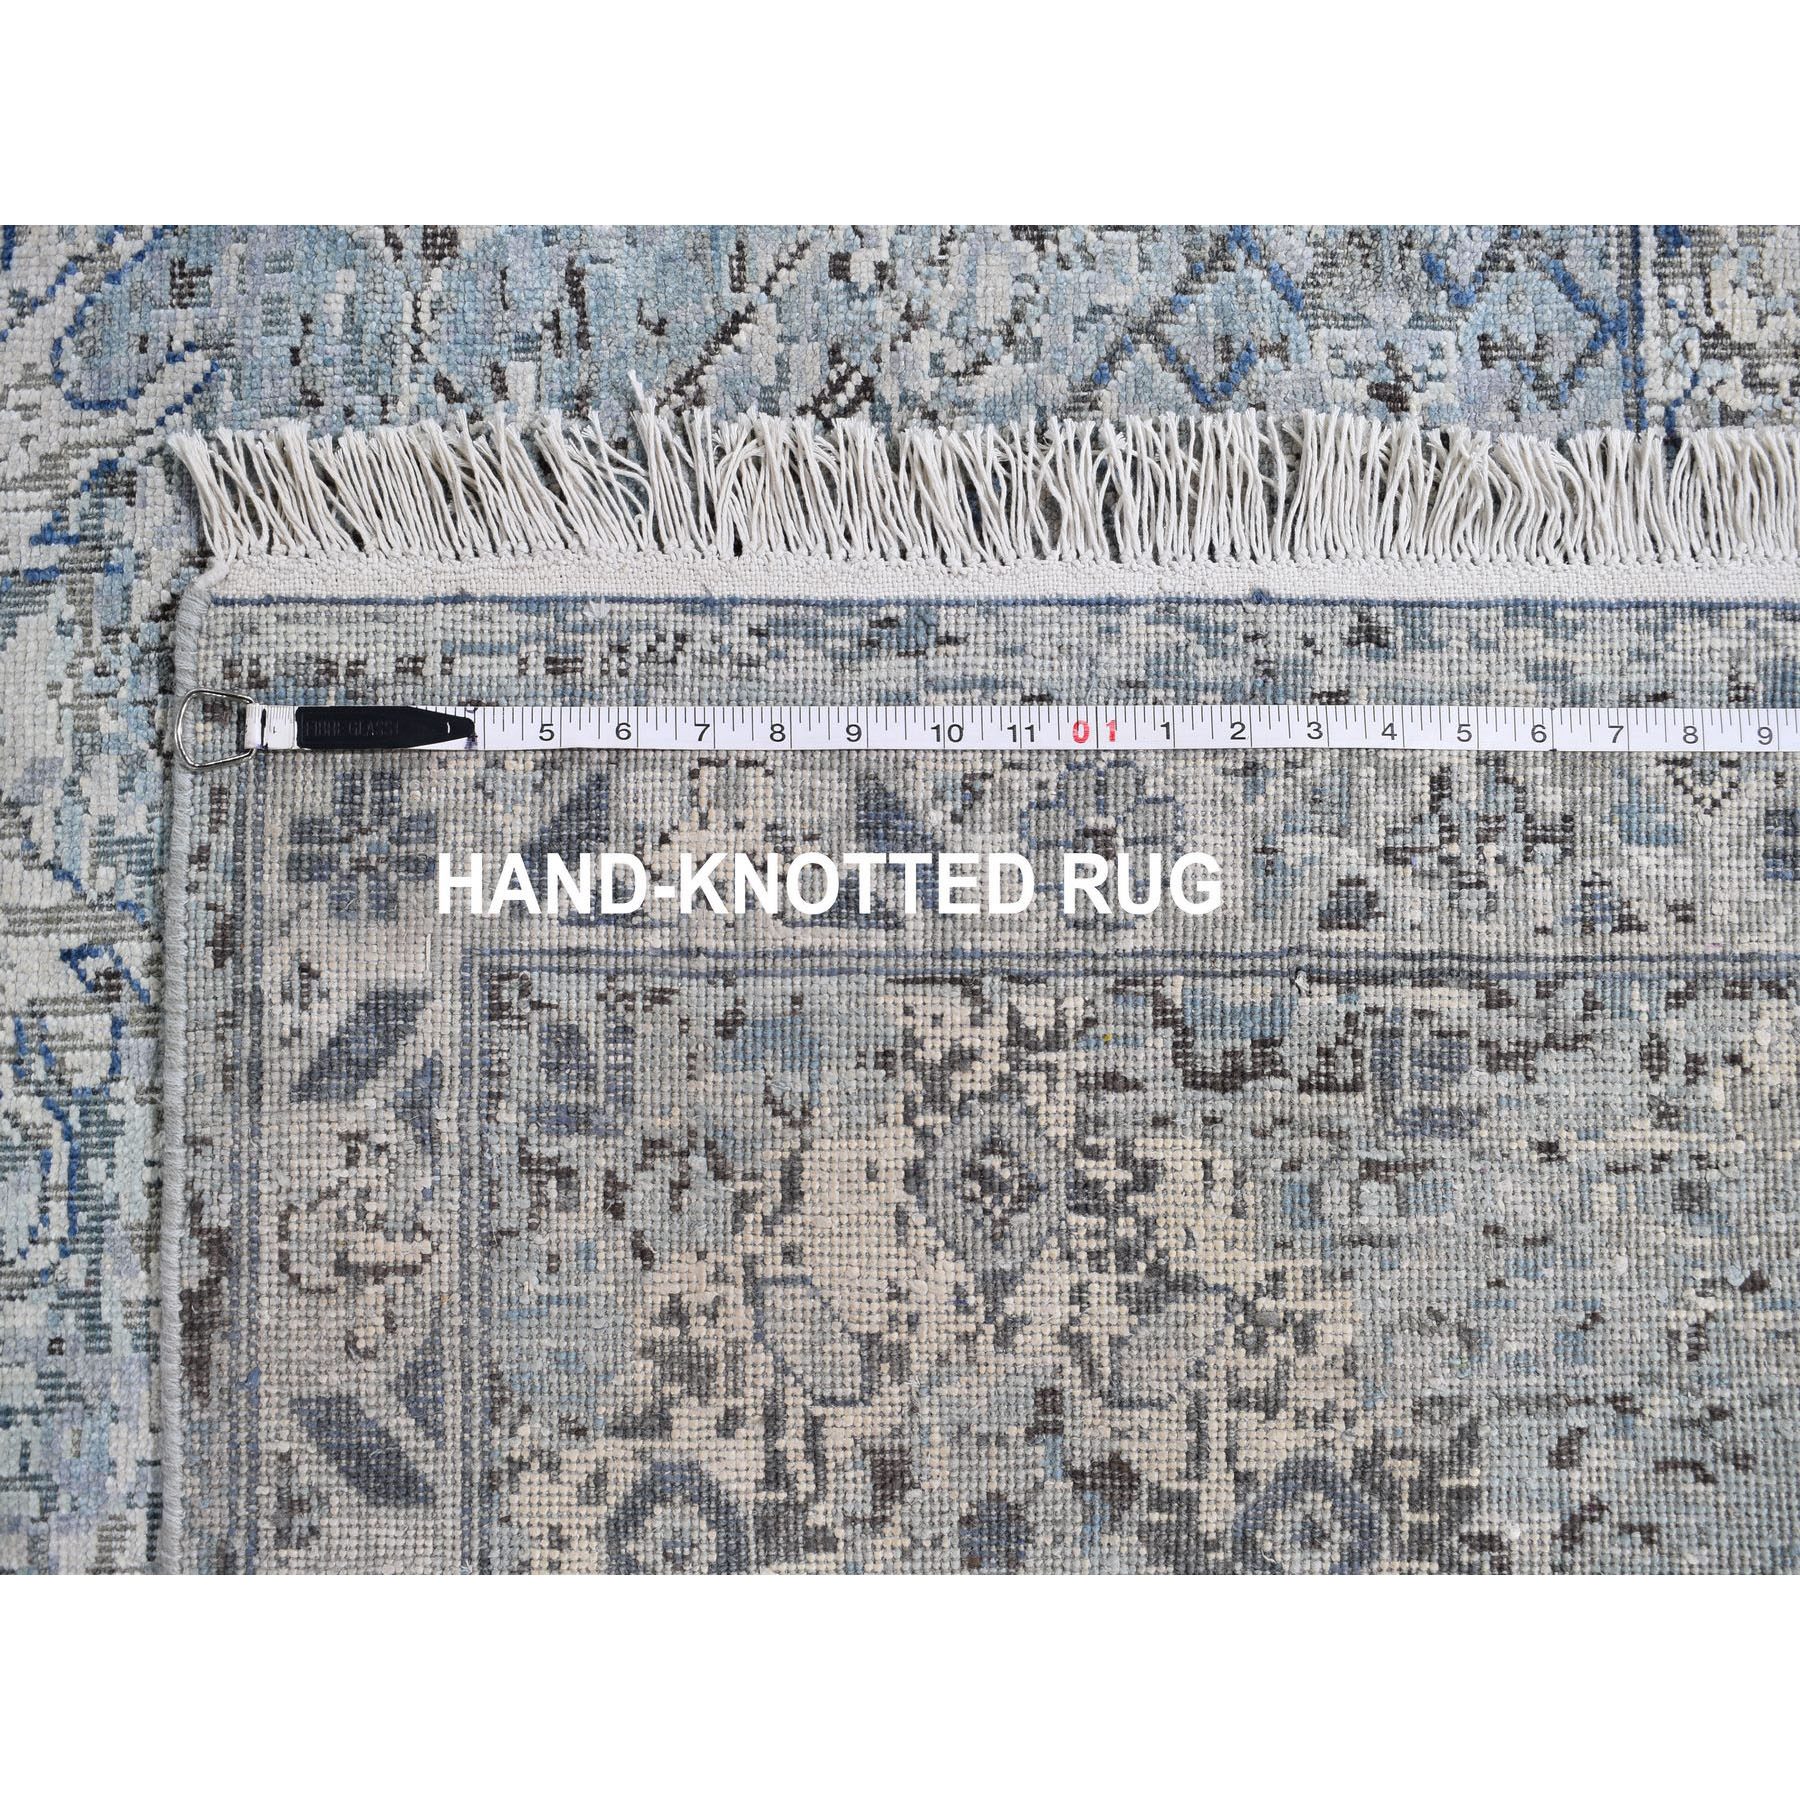 10-x14- Distressed Oushak Pure Silk with Textured Wool Hand-Knotted Oriental Rug 